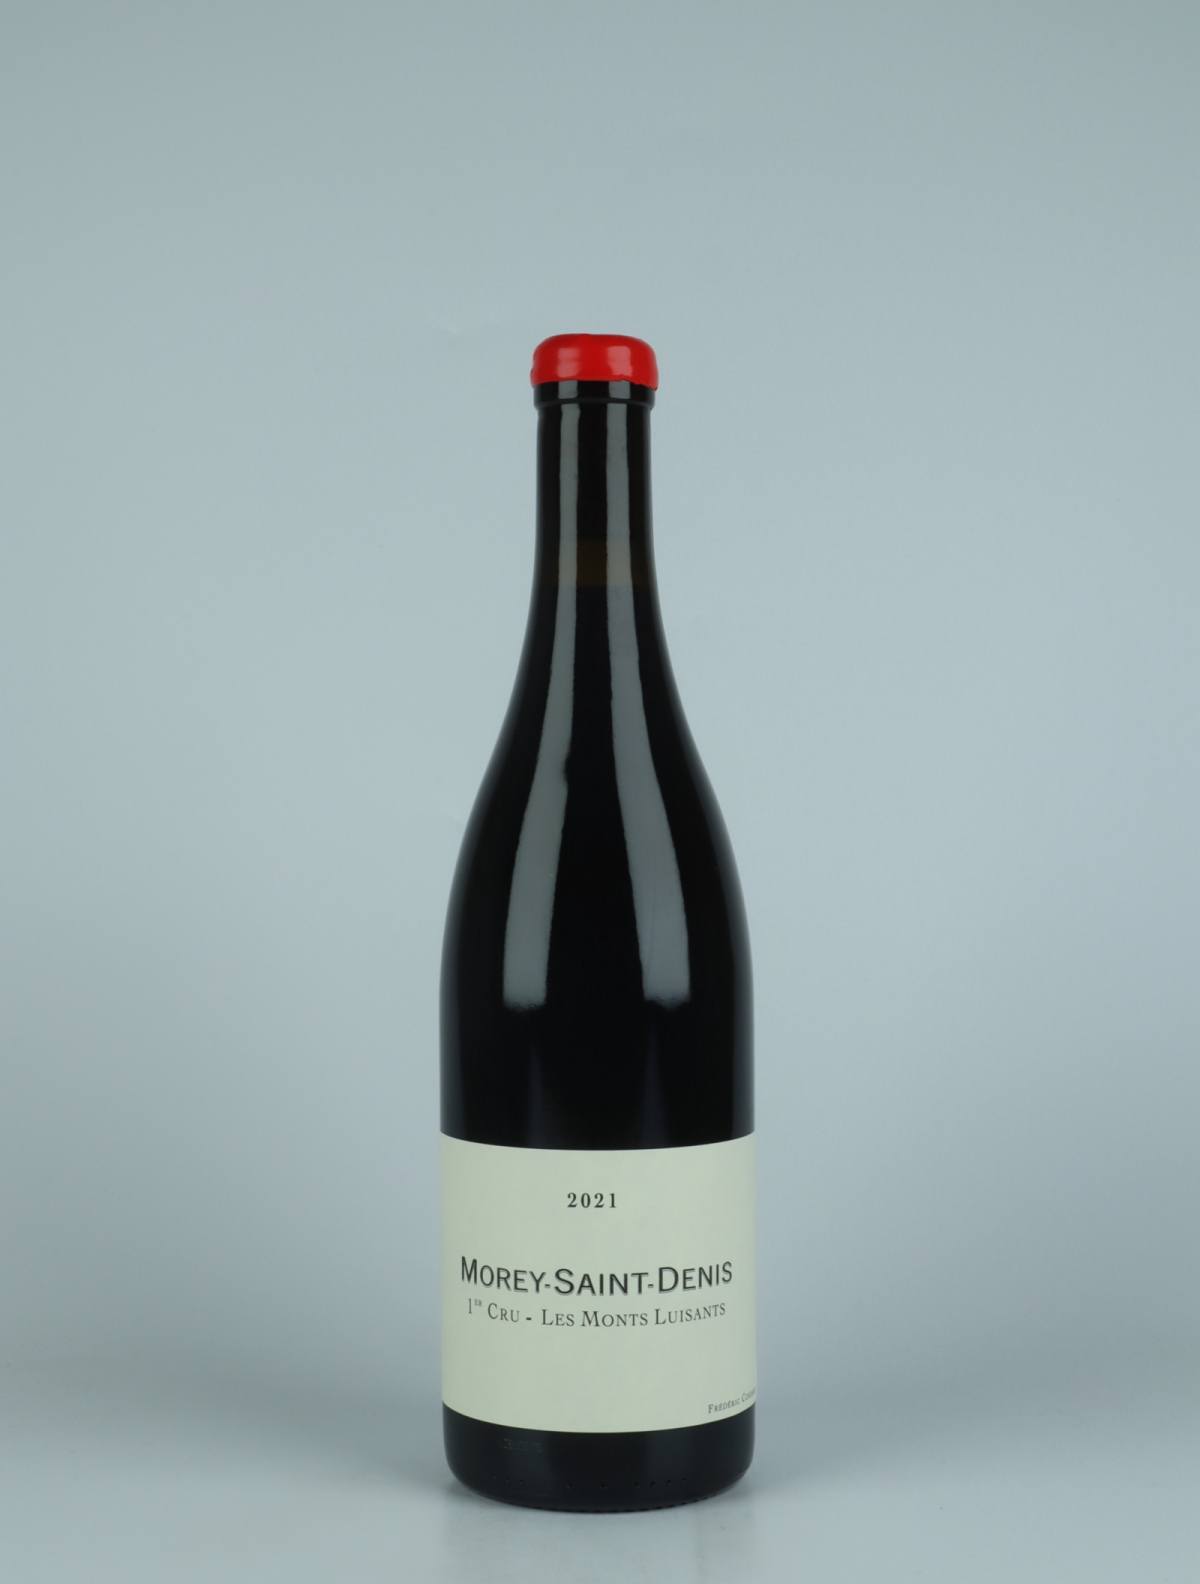 A bottle 2021 Morey Saint Denis 1. Cru - Les Monts Luisants Red wine from Frédéric Cossard, Burgundy in France